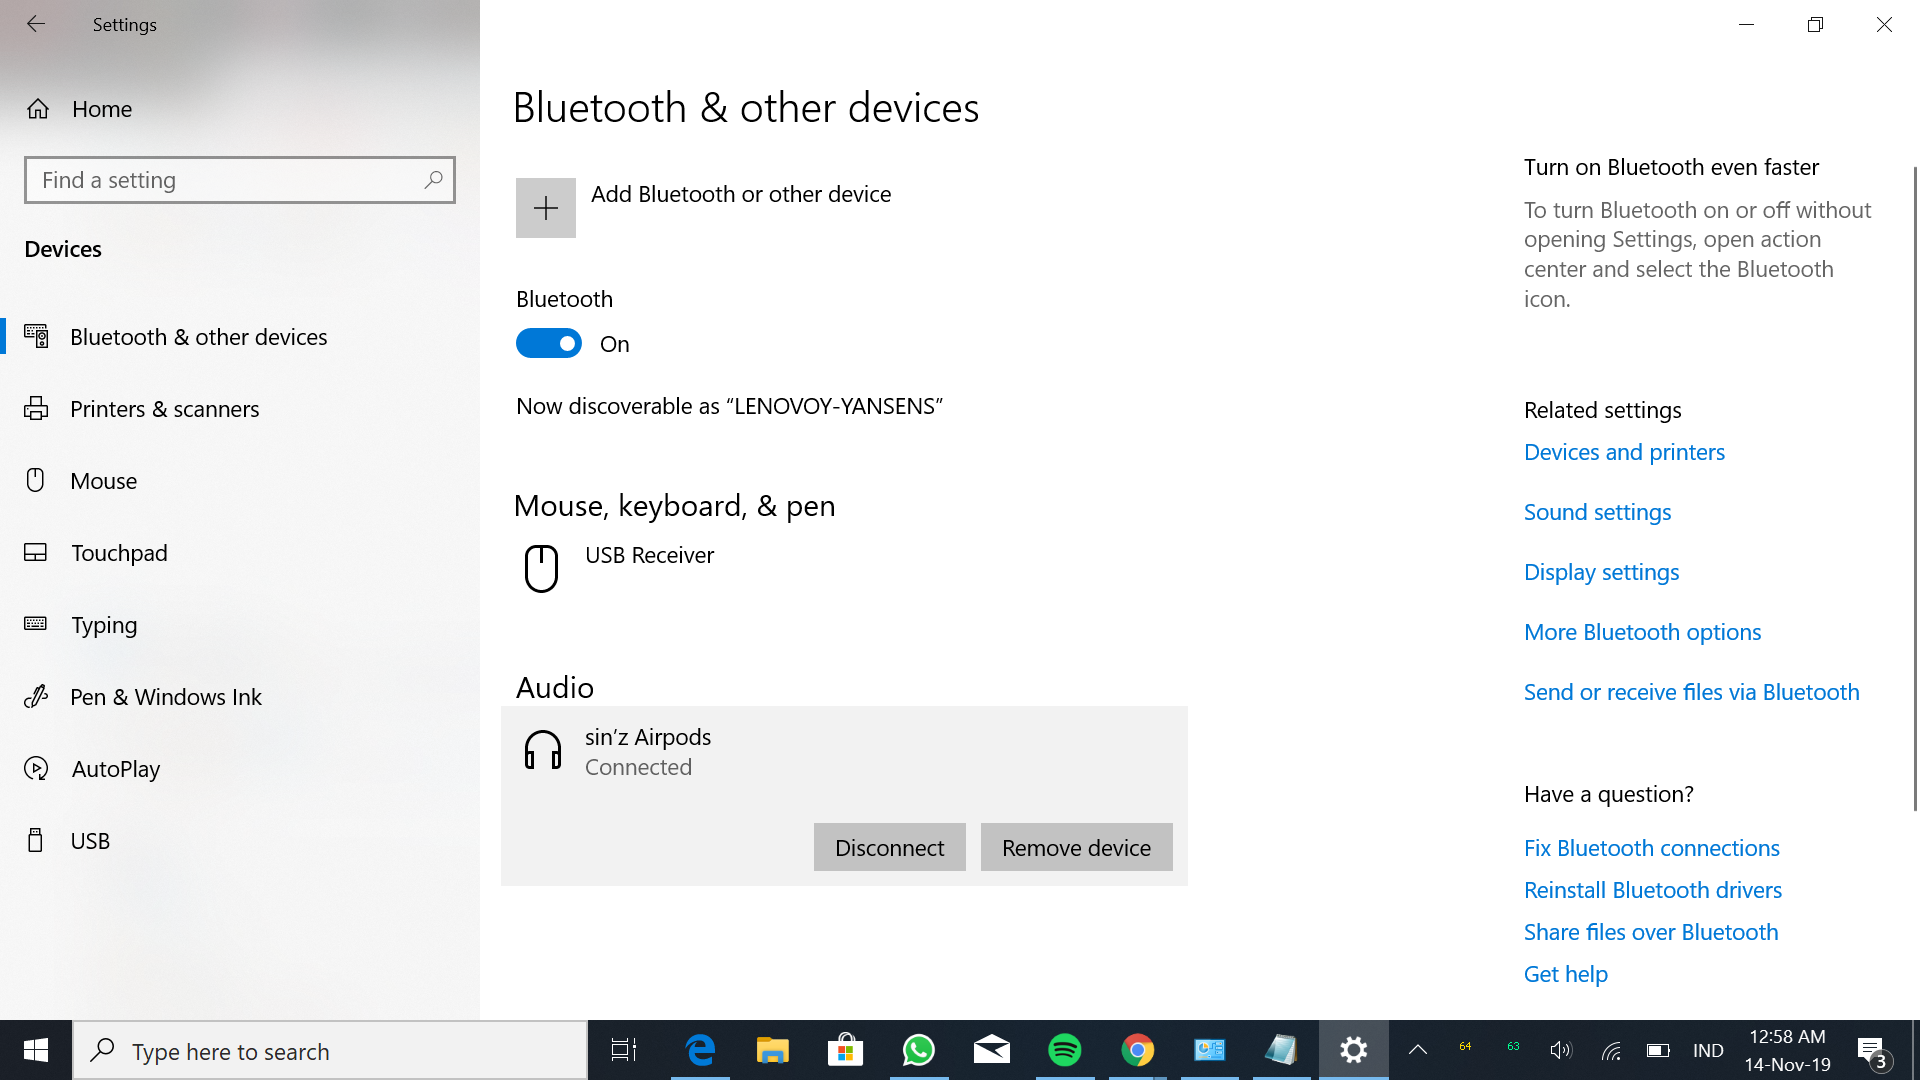 I have problem with my airpods connected to my windows 10 laptop, but no sounds 85c2c246-9350-46a3-becb-728fea601d72?upload=true.png